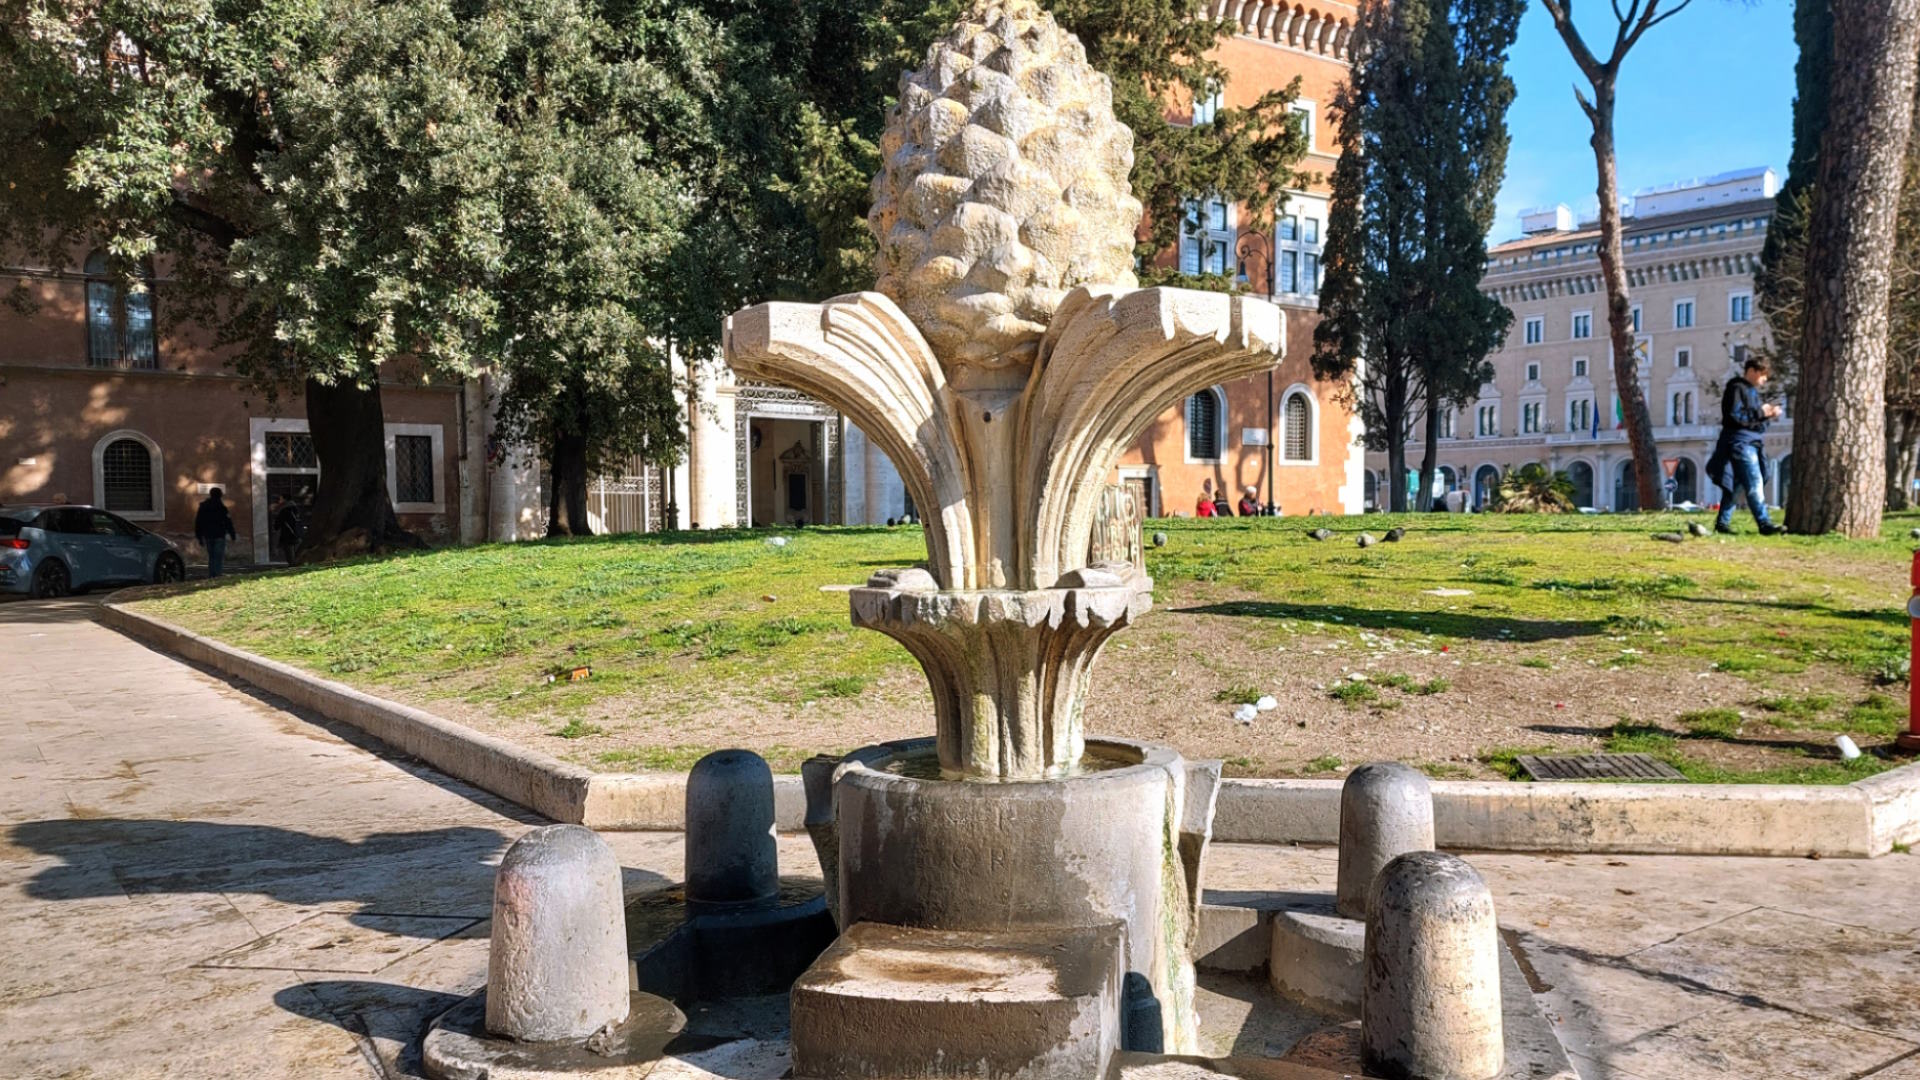 The Pigna fountain at St. Peter's in Rome - Pigna is the name of rione IX  of Rome. The name means pine cone in Italian, and the symbol for the rione  is